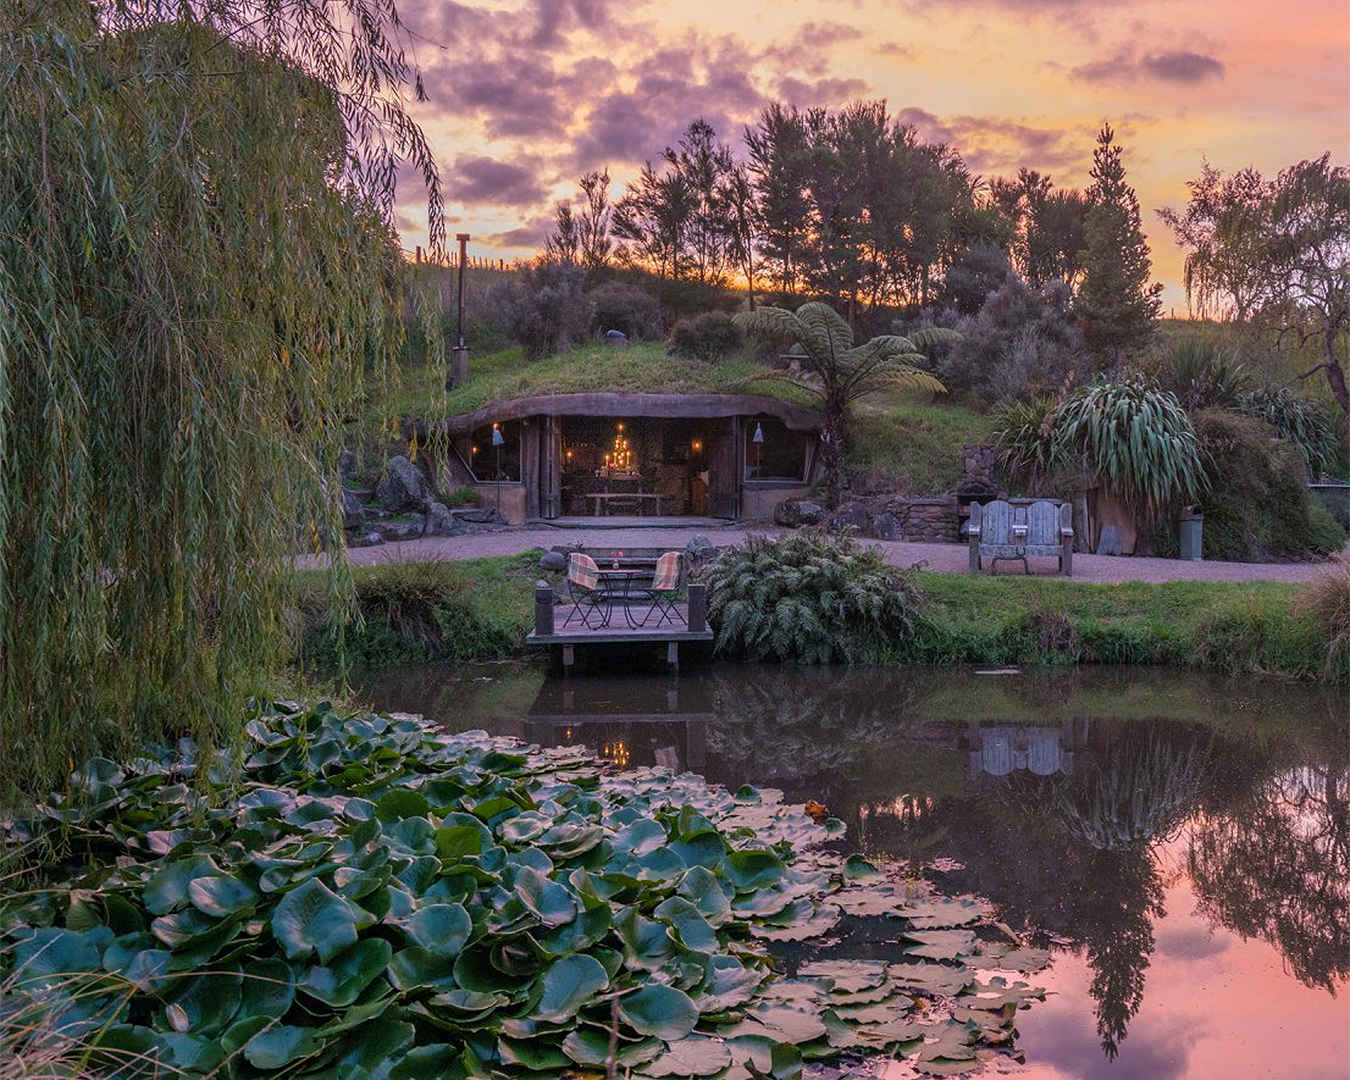 Underhill Valley is seen in front of a beautiful pond at sunset.